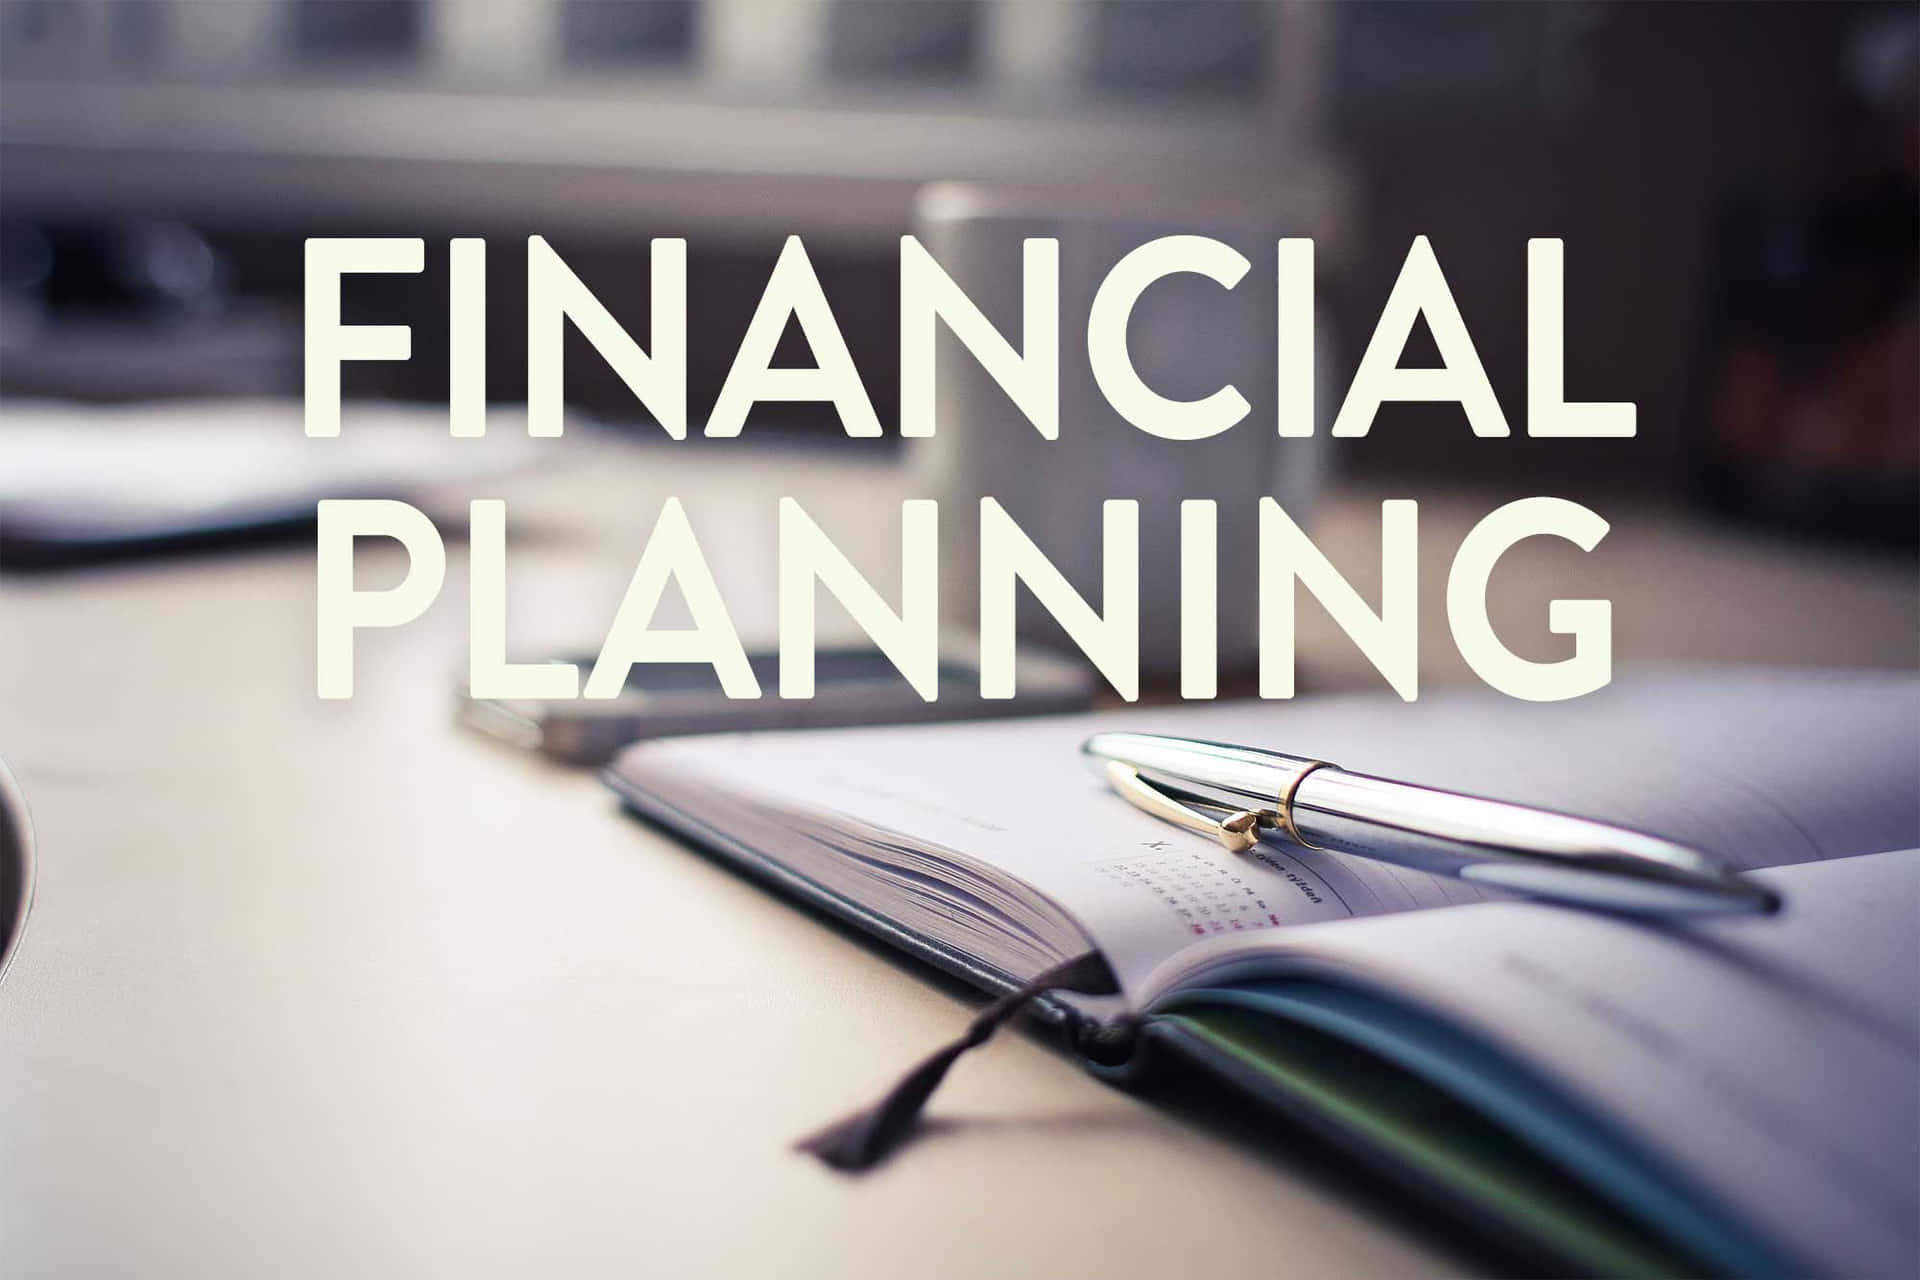 Financial Planning - A Notebook And Pen On A Desk